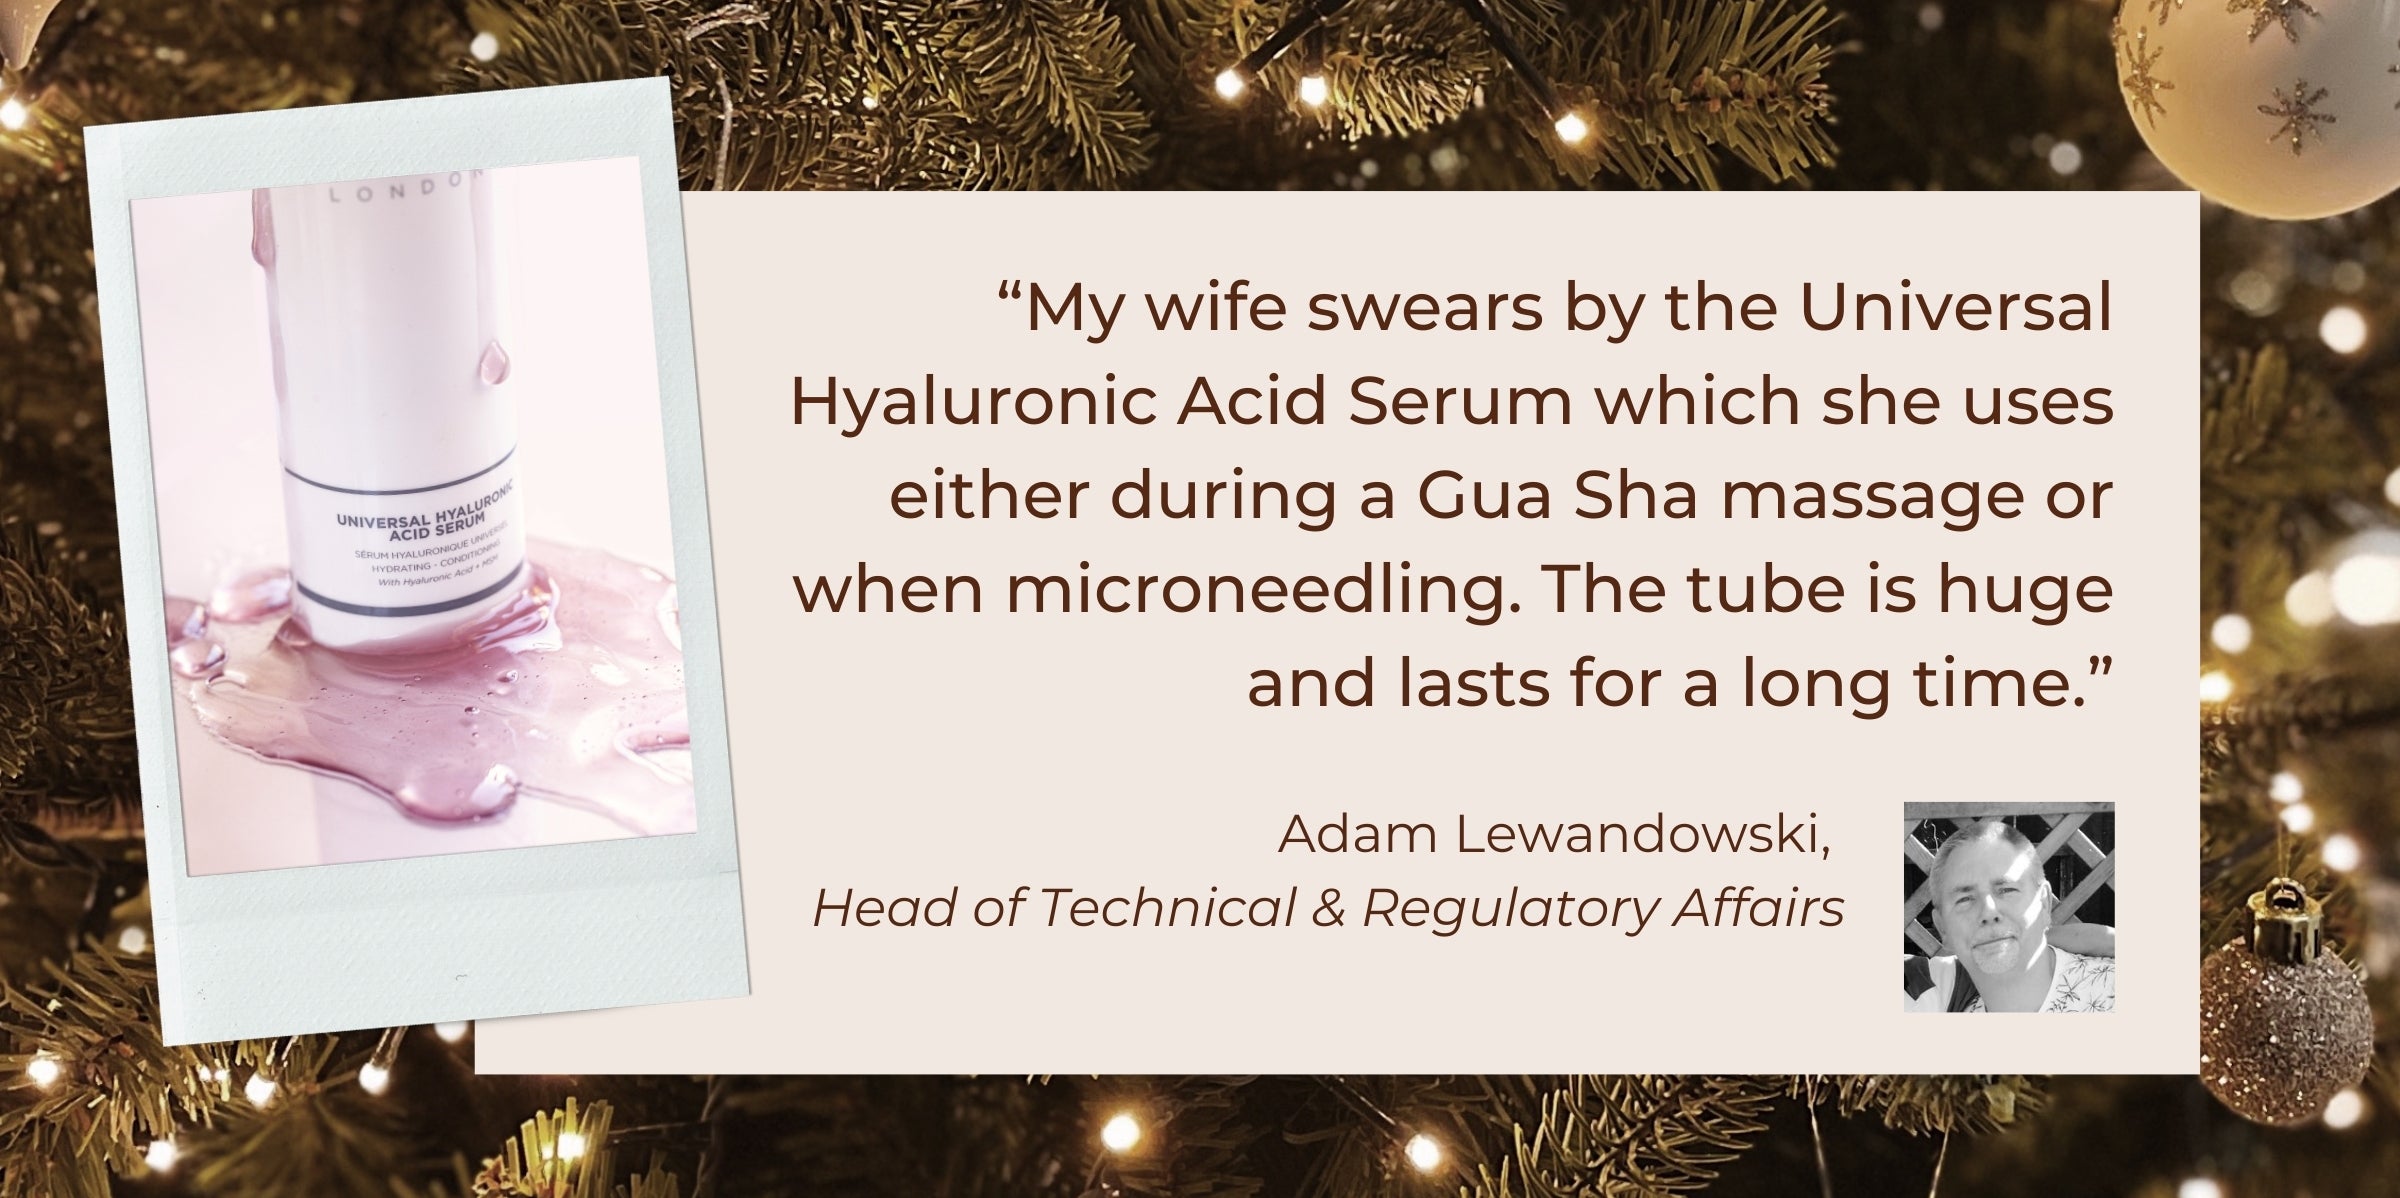 "My wife swears by the Universal Hyaluronic Acid Serum which she uses either during a Gua Sha massage or when microneedling. The tube is huge and lasts for a long time.